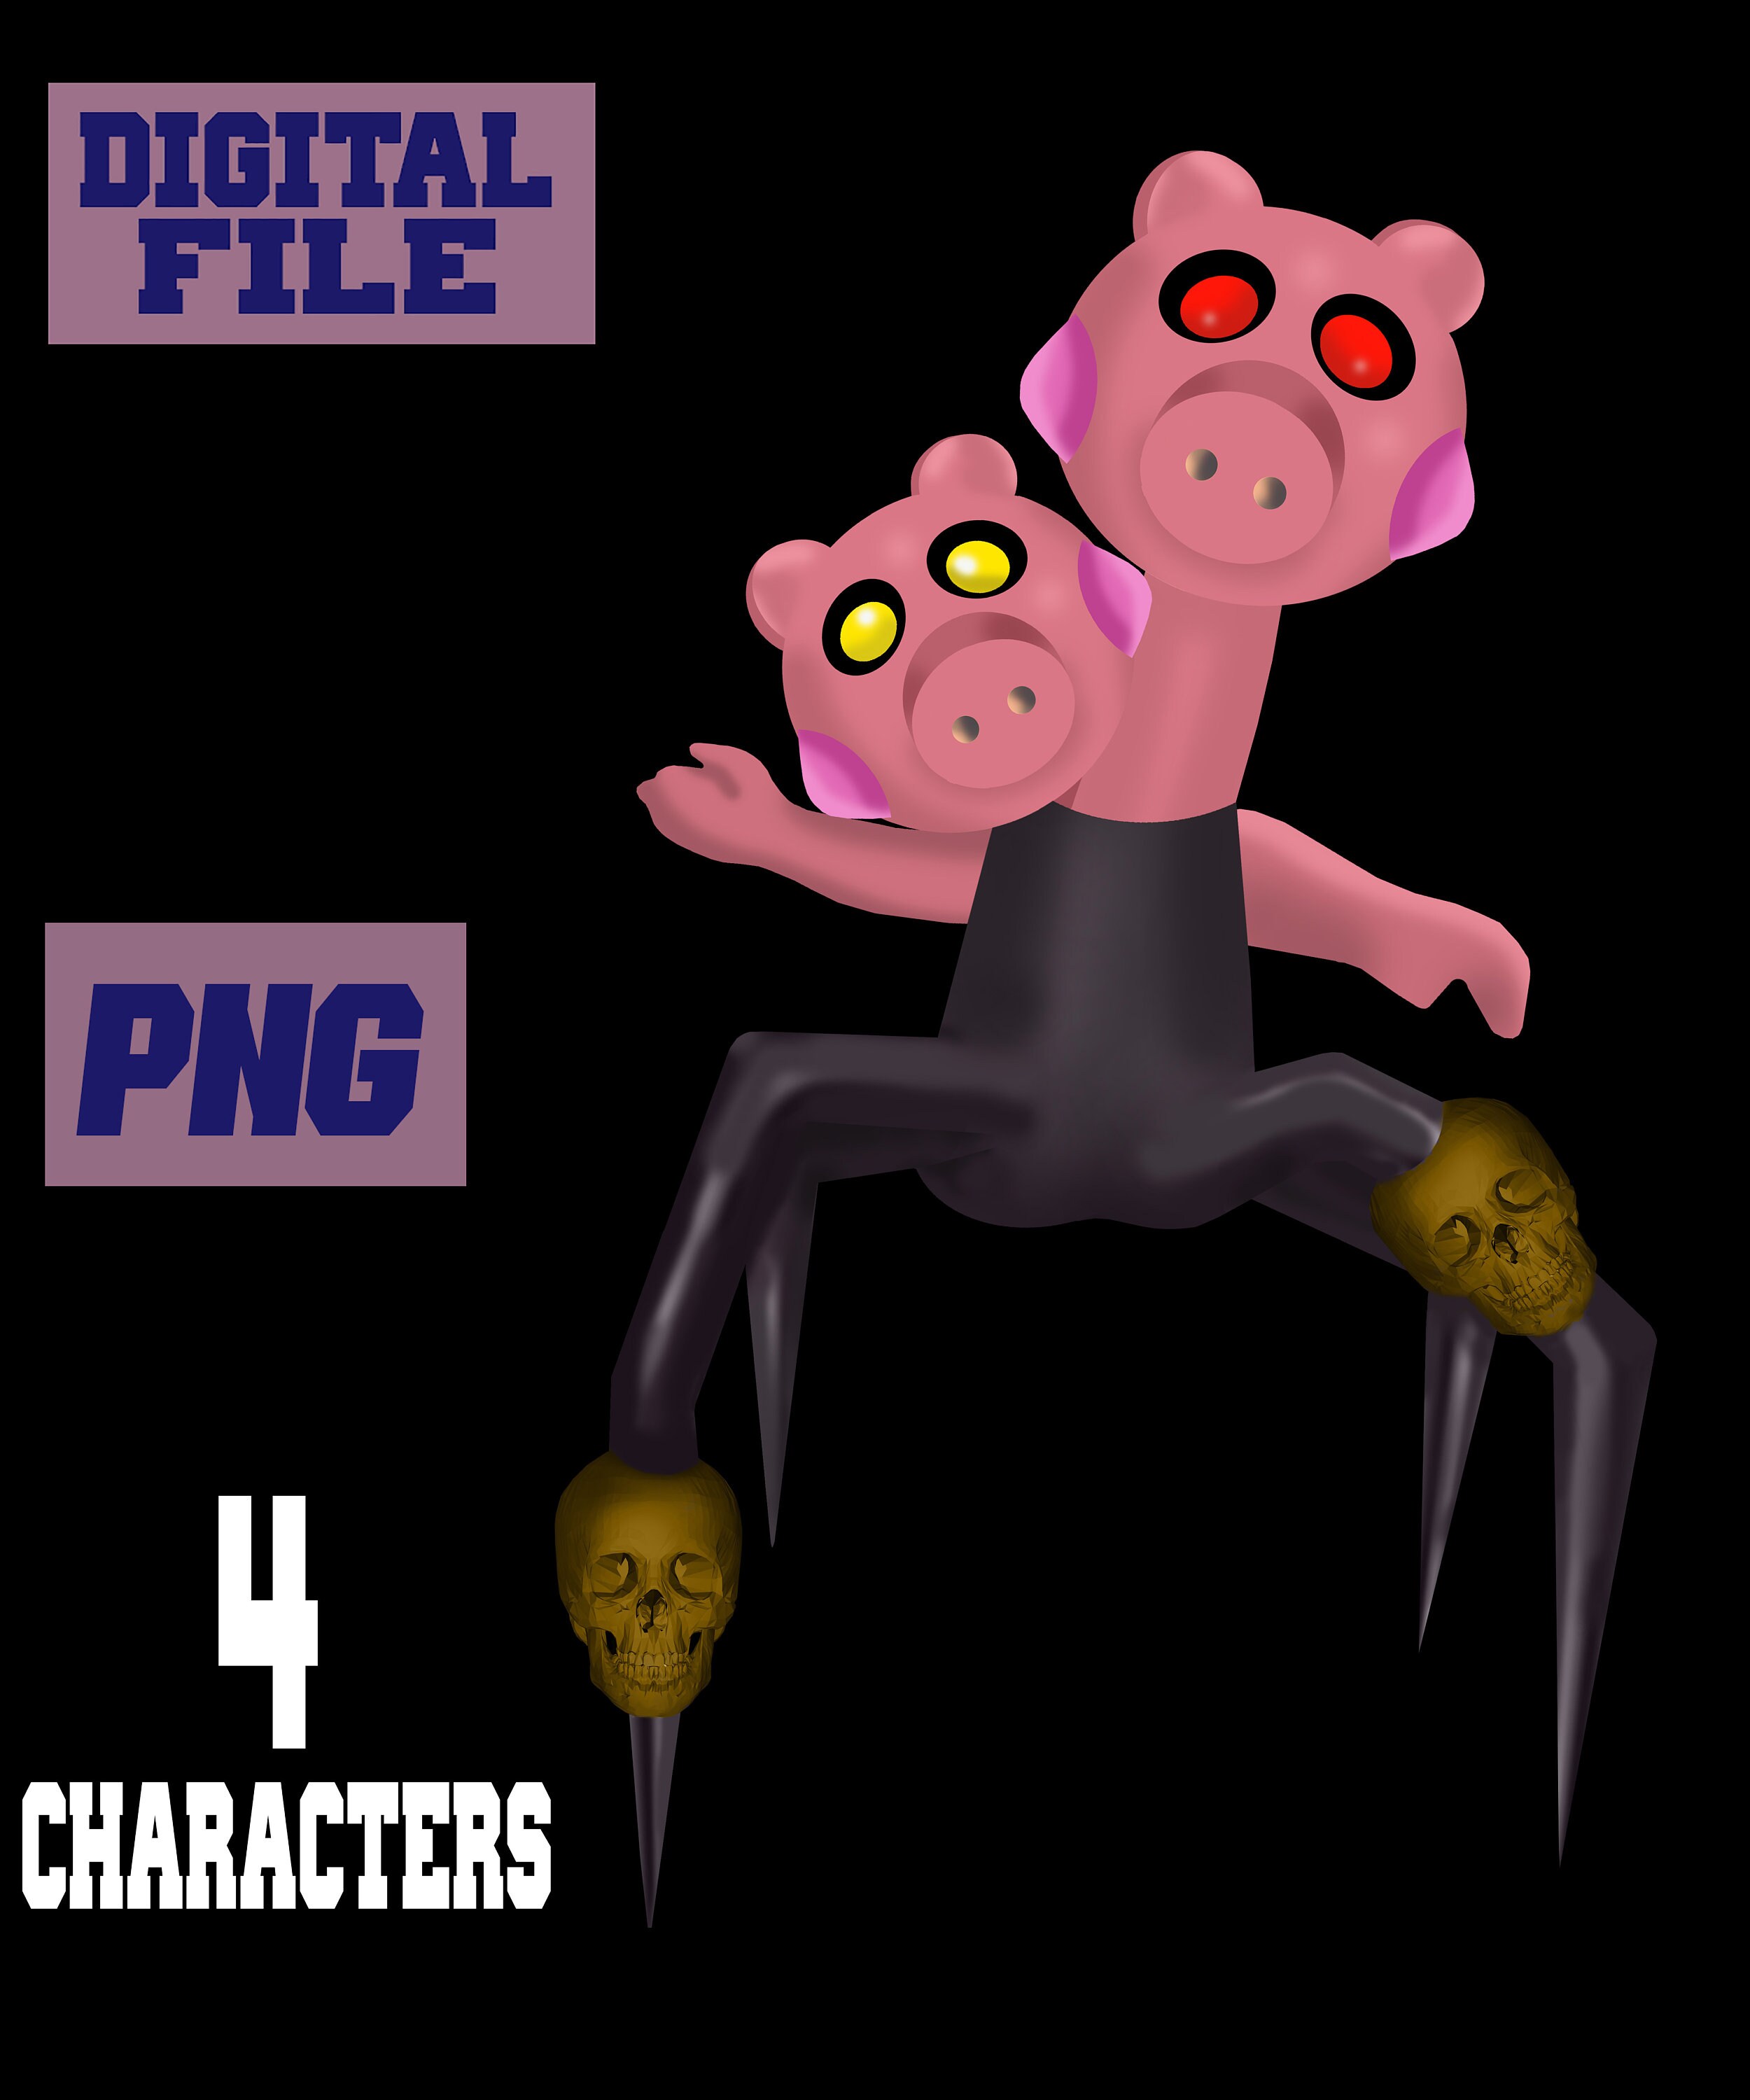 PNG and jpg Piggy Roblox game gaming, 13 characters in one design..INSTANT  DOWNLOAD, download file, digital file